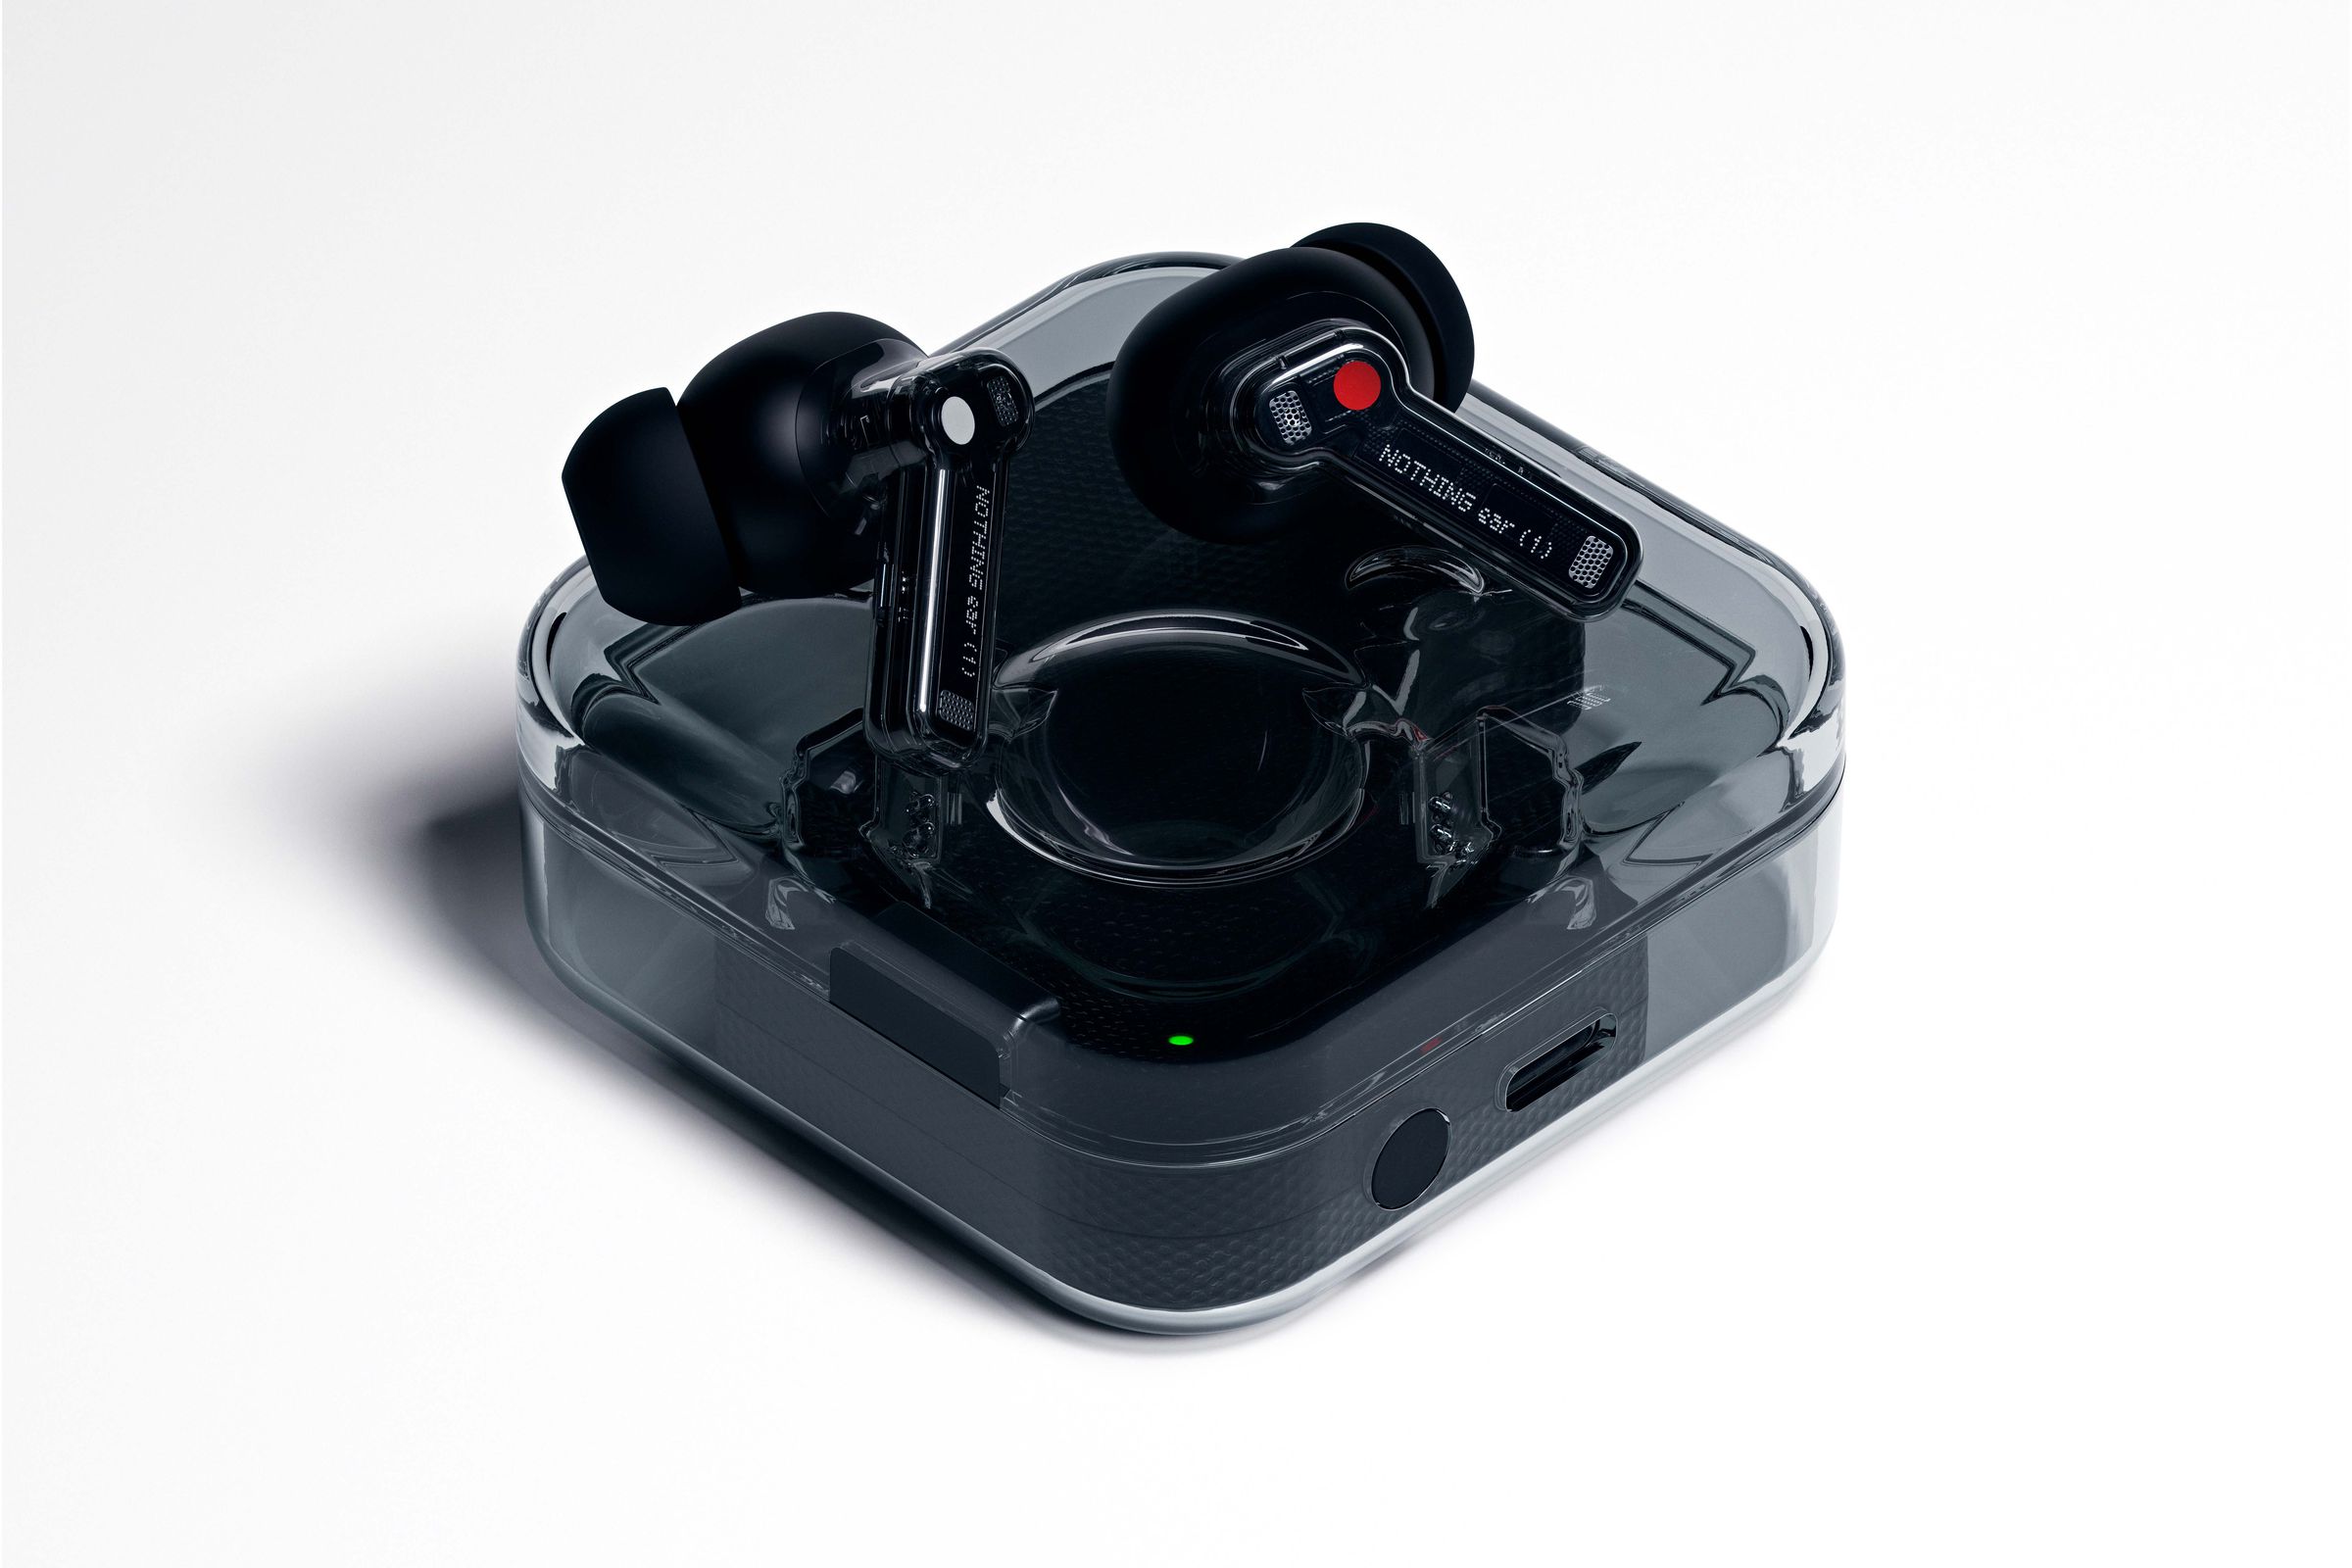 The Ear 1 earbuds and case, now in black.